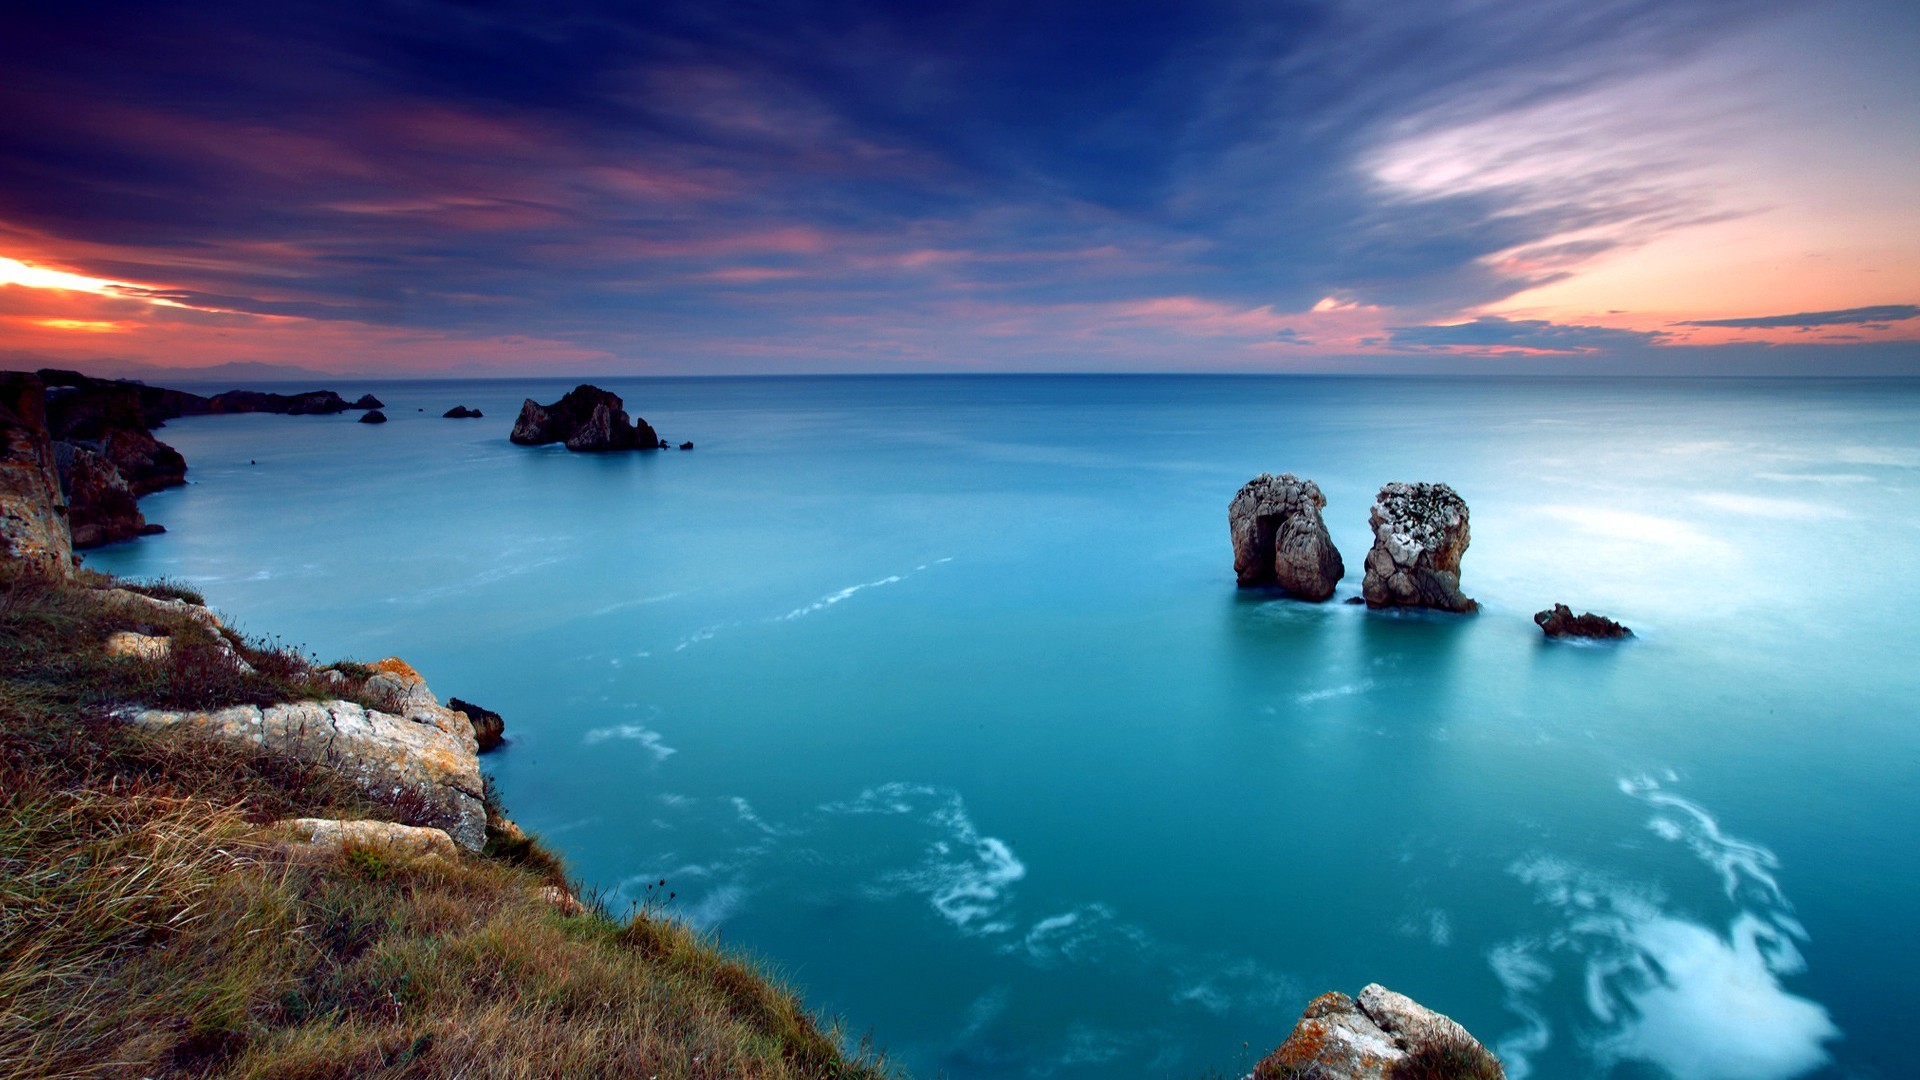 Wallpapers landscapes sea beautifully on the desktop